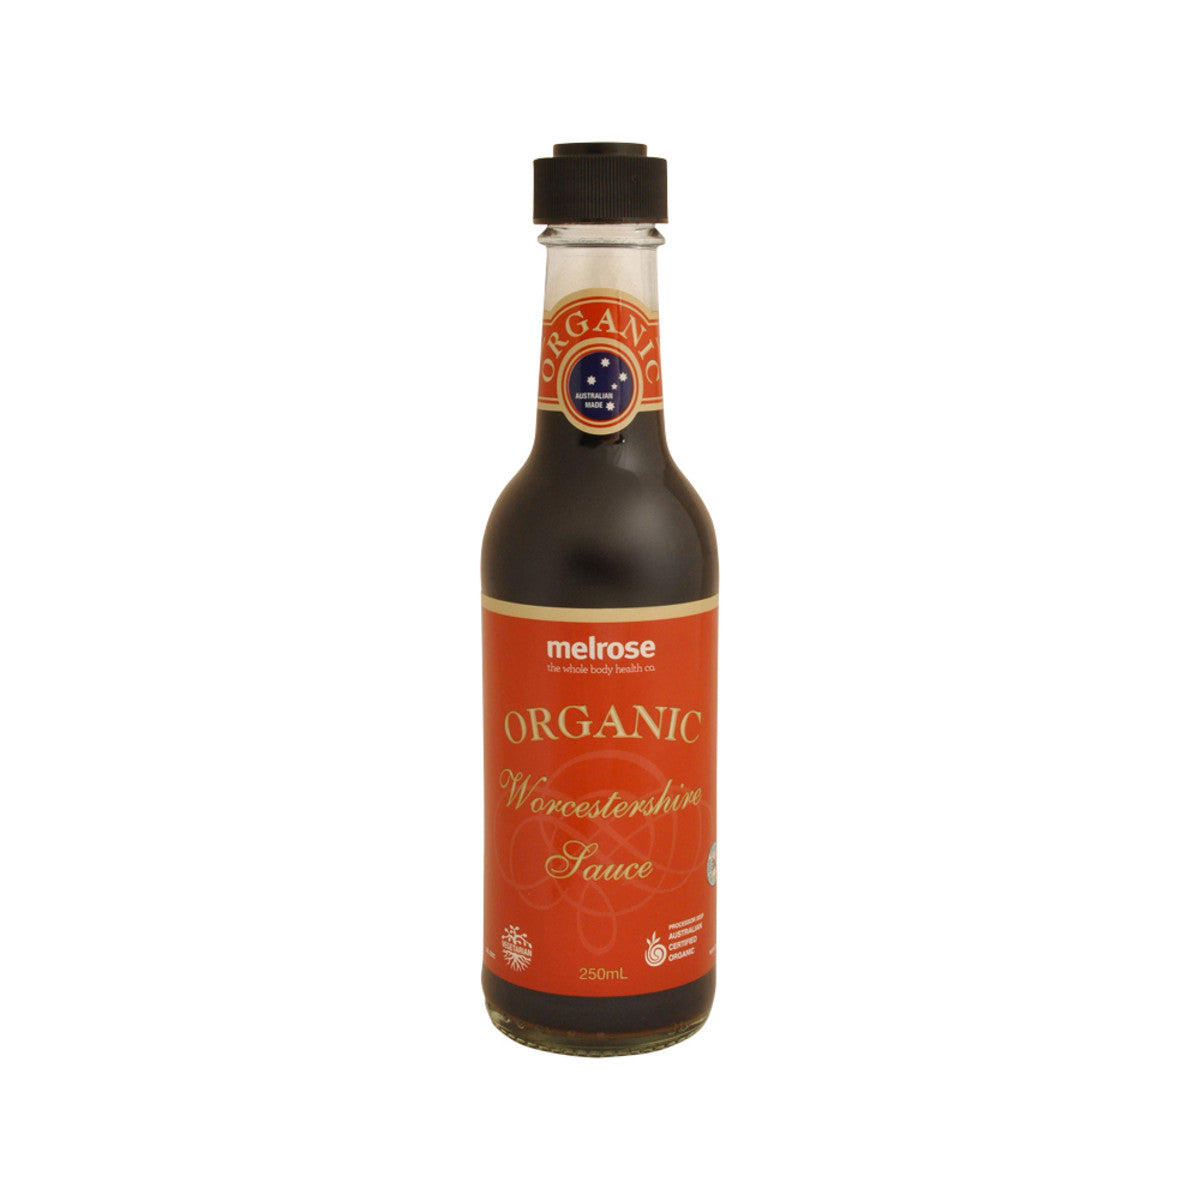 Melrose Organic Worcestershire Sauce 250ml-The Living Co.